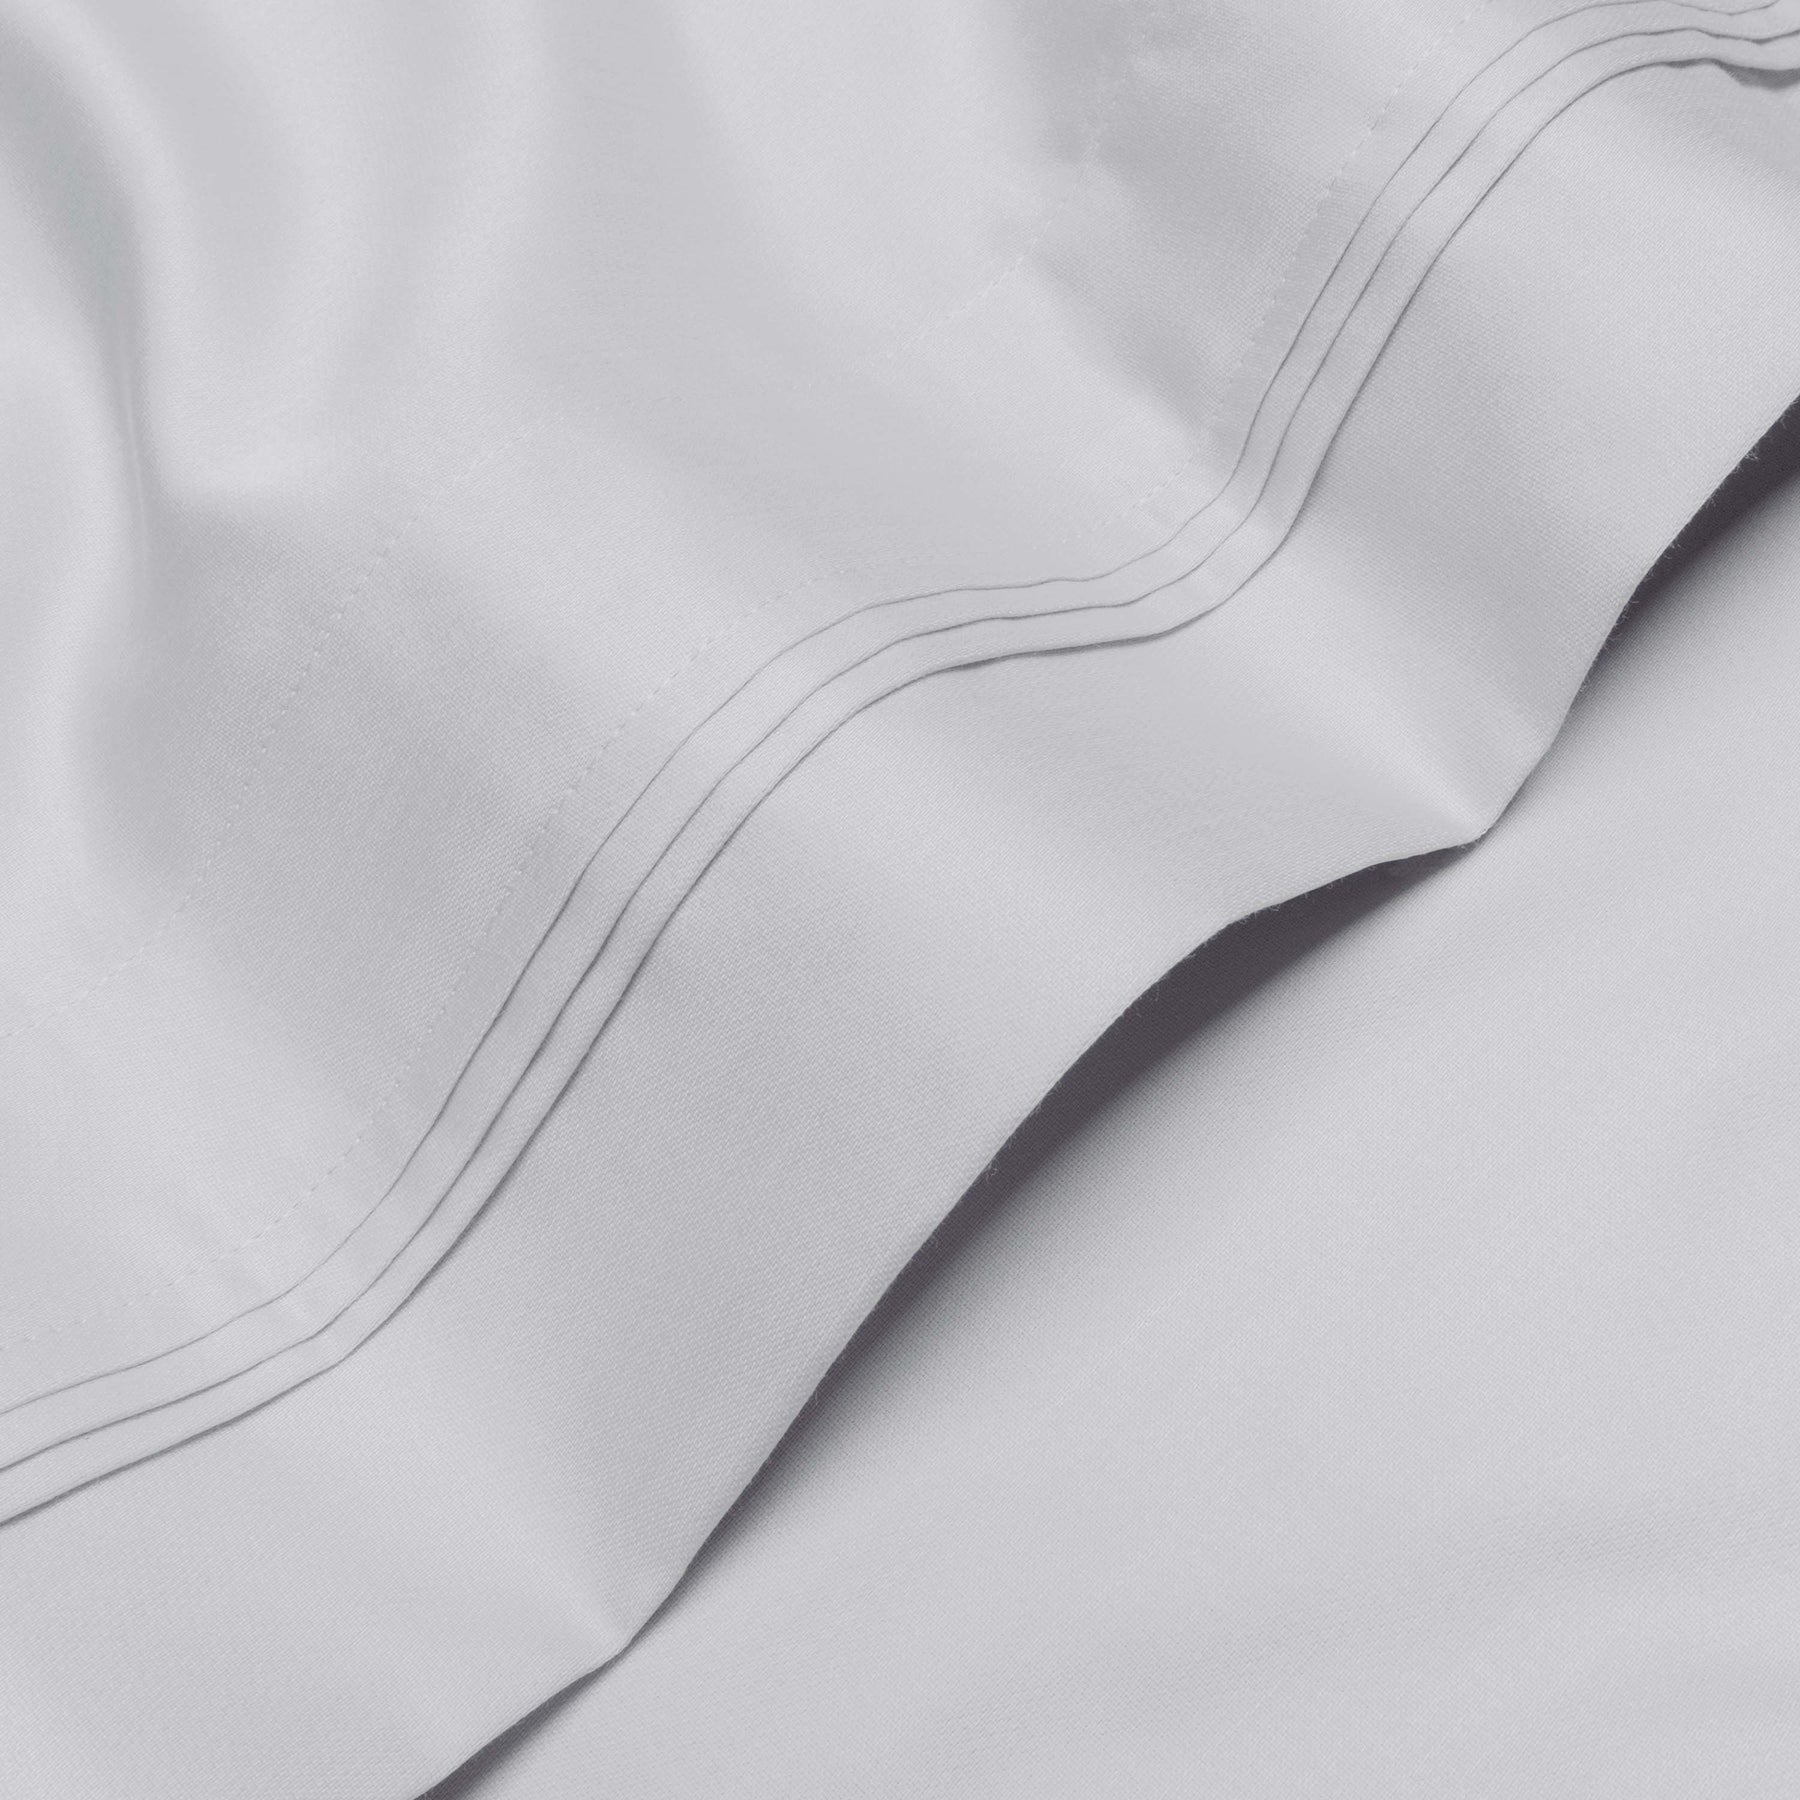 Egyptian Cotton 1000 Thread Count Solid Sheet Set Olympic Queen - Platinum